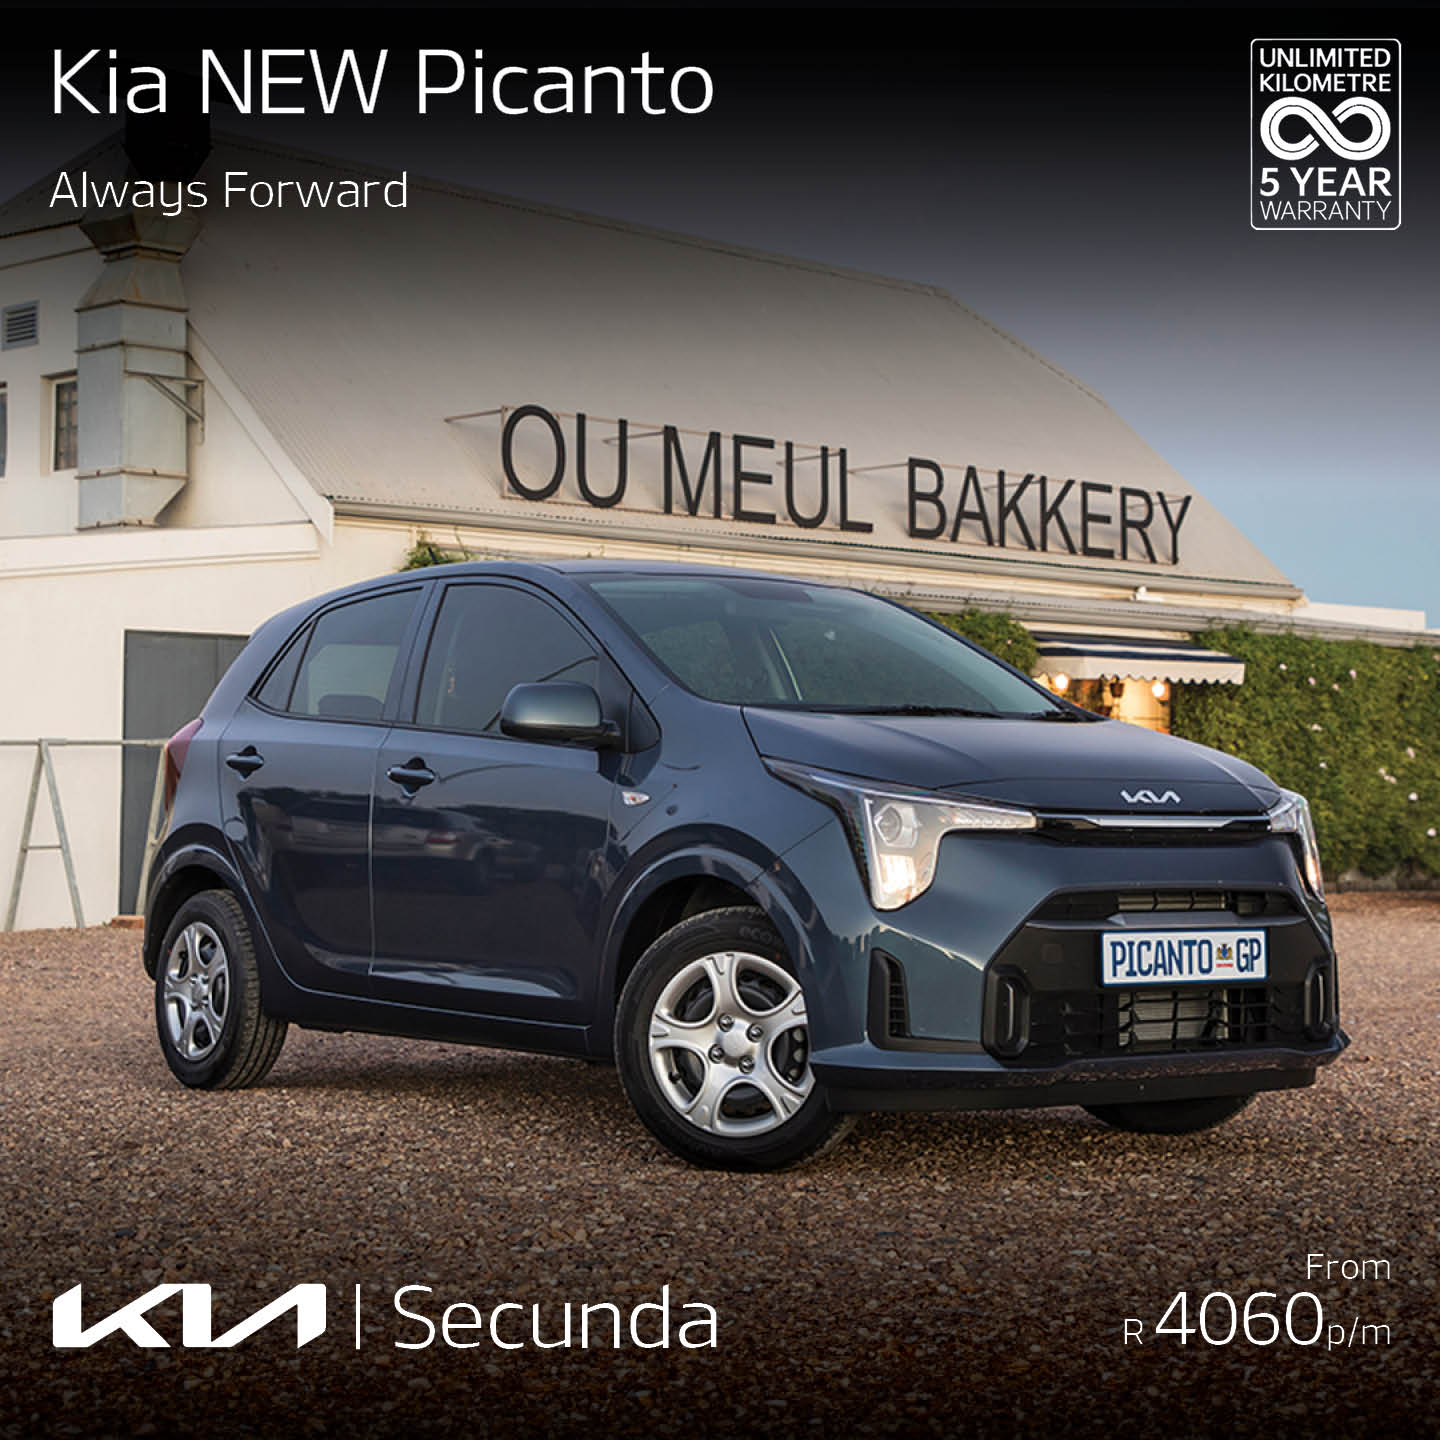 ALWAYS Fordward with the NEW KIA PICANTO image from Eastvaal Motors